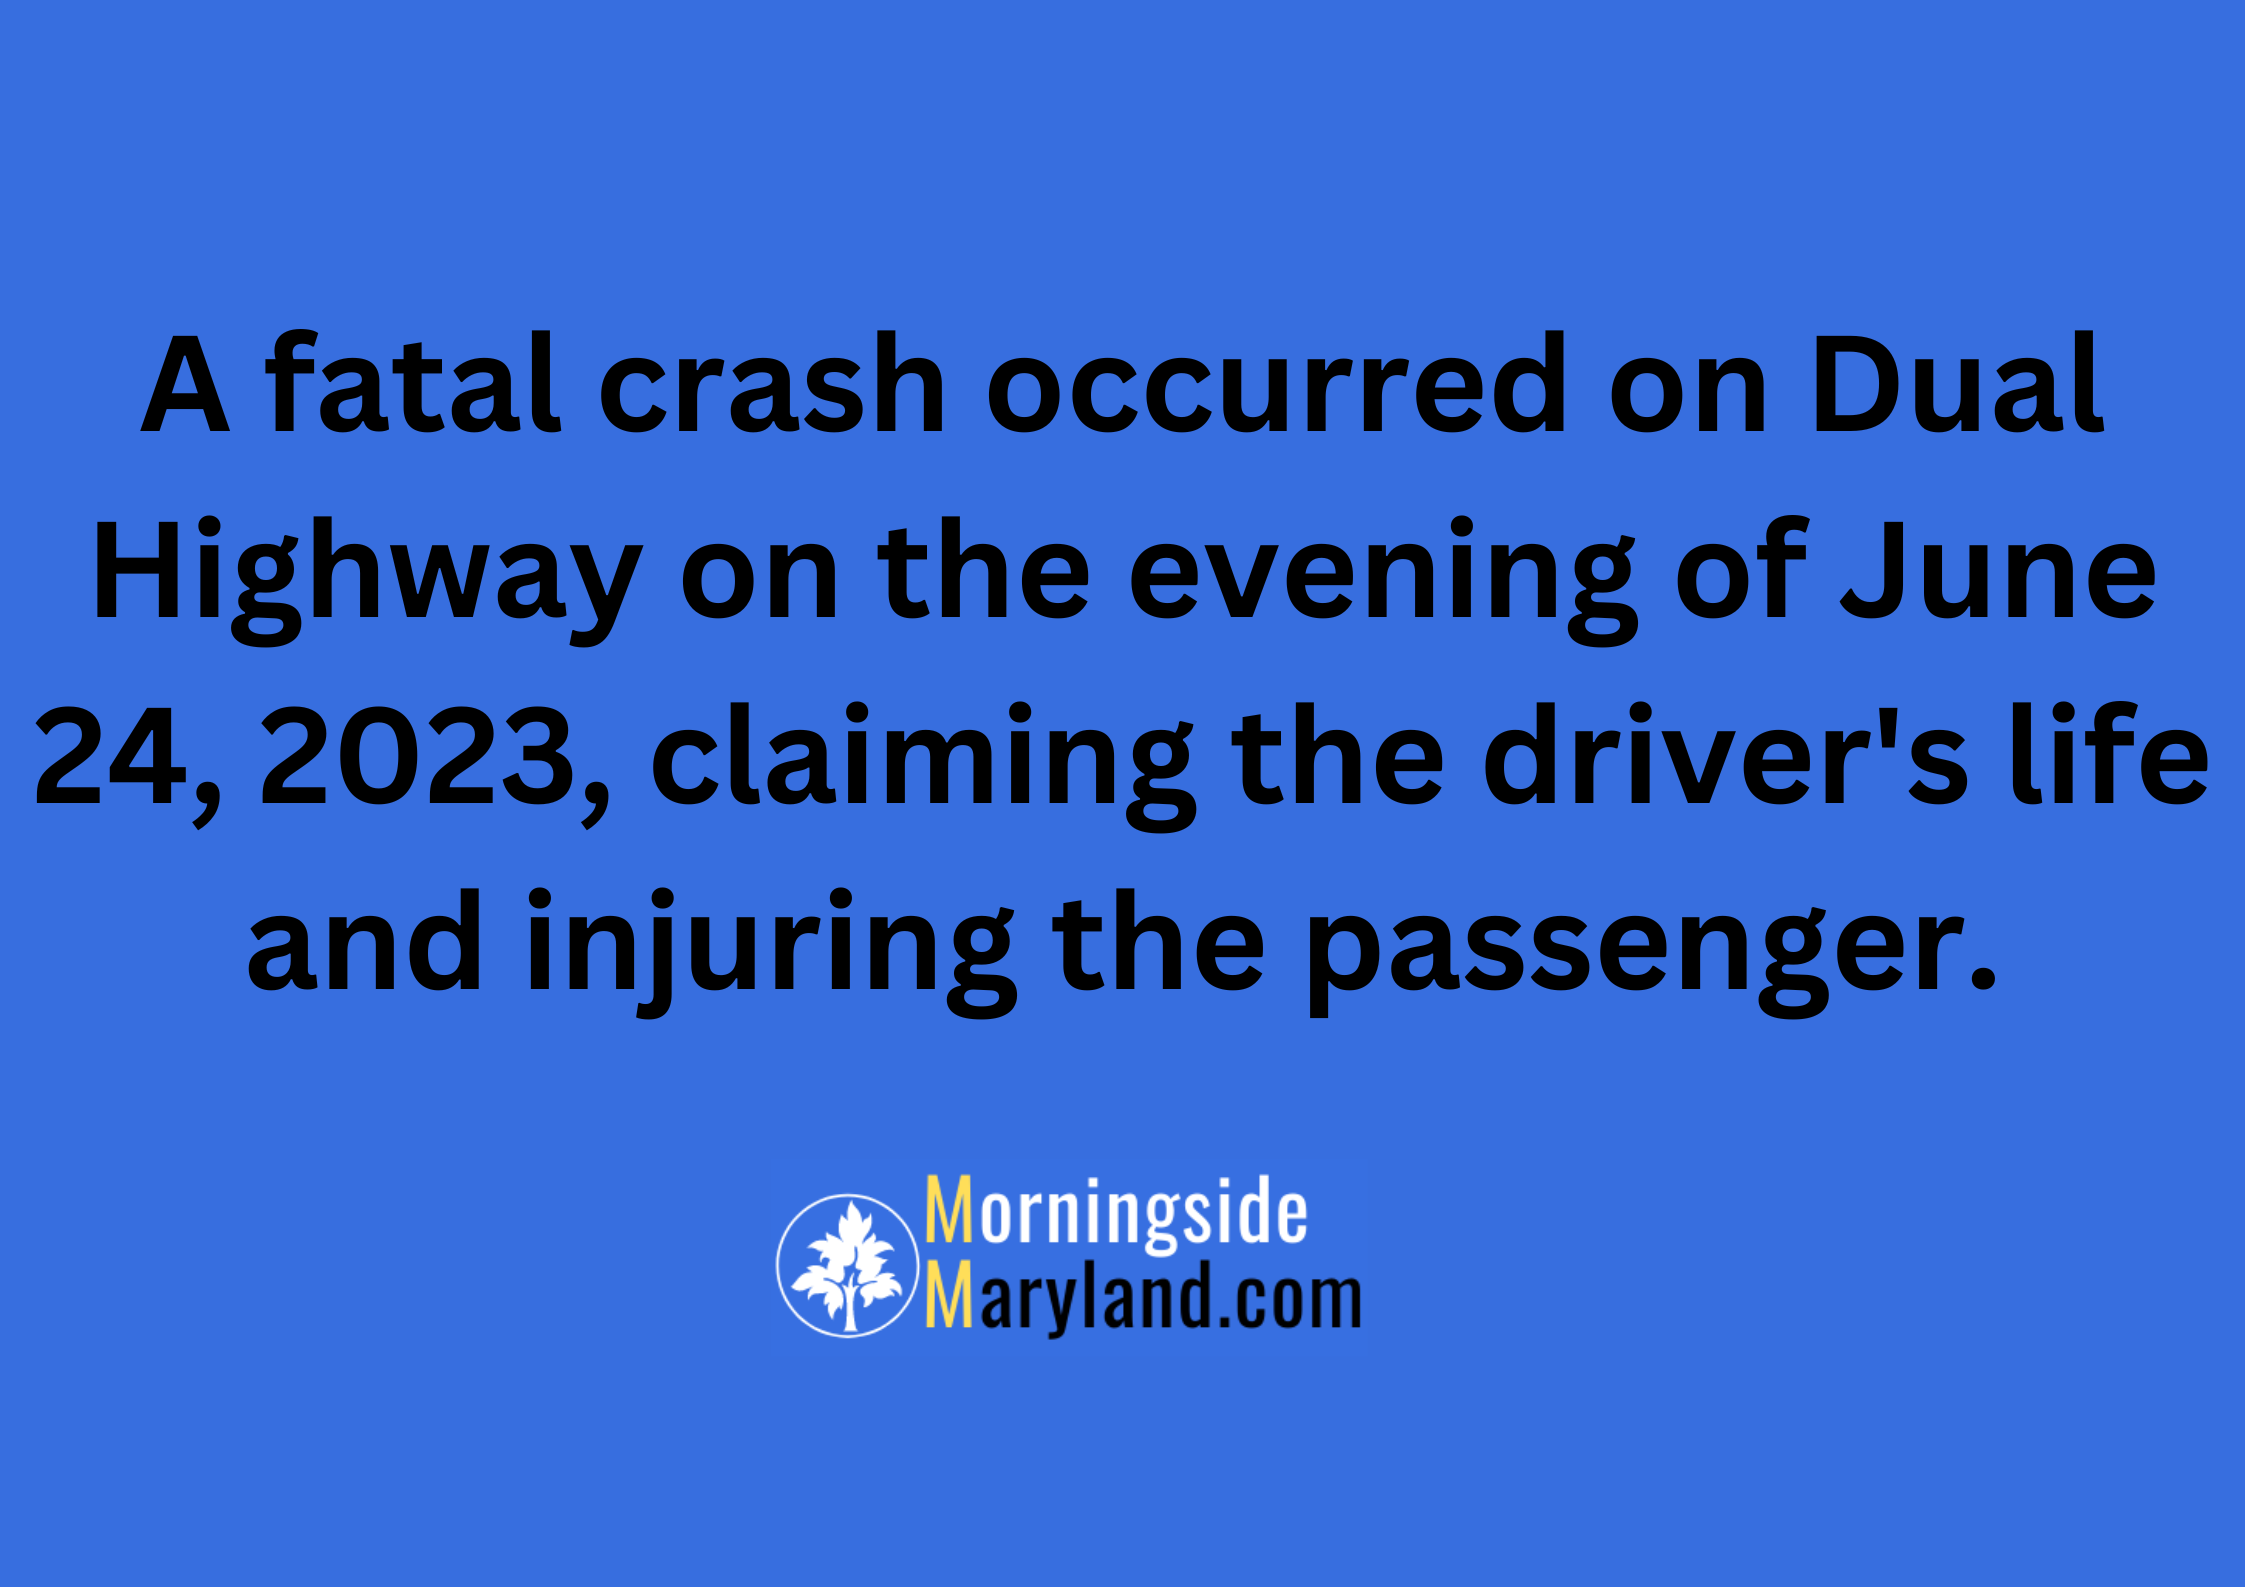 A fatal crash occurred on Dual Highway on the evening of June 24, 2023, claiming the driver's life and injuring the passenger.